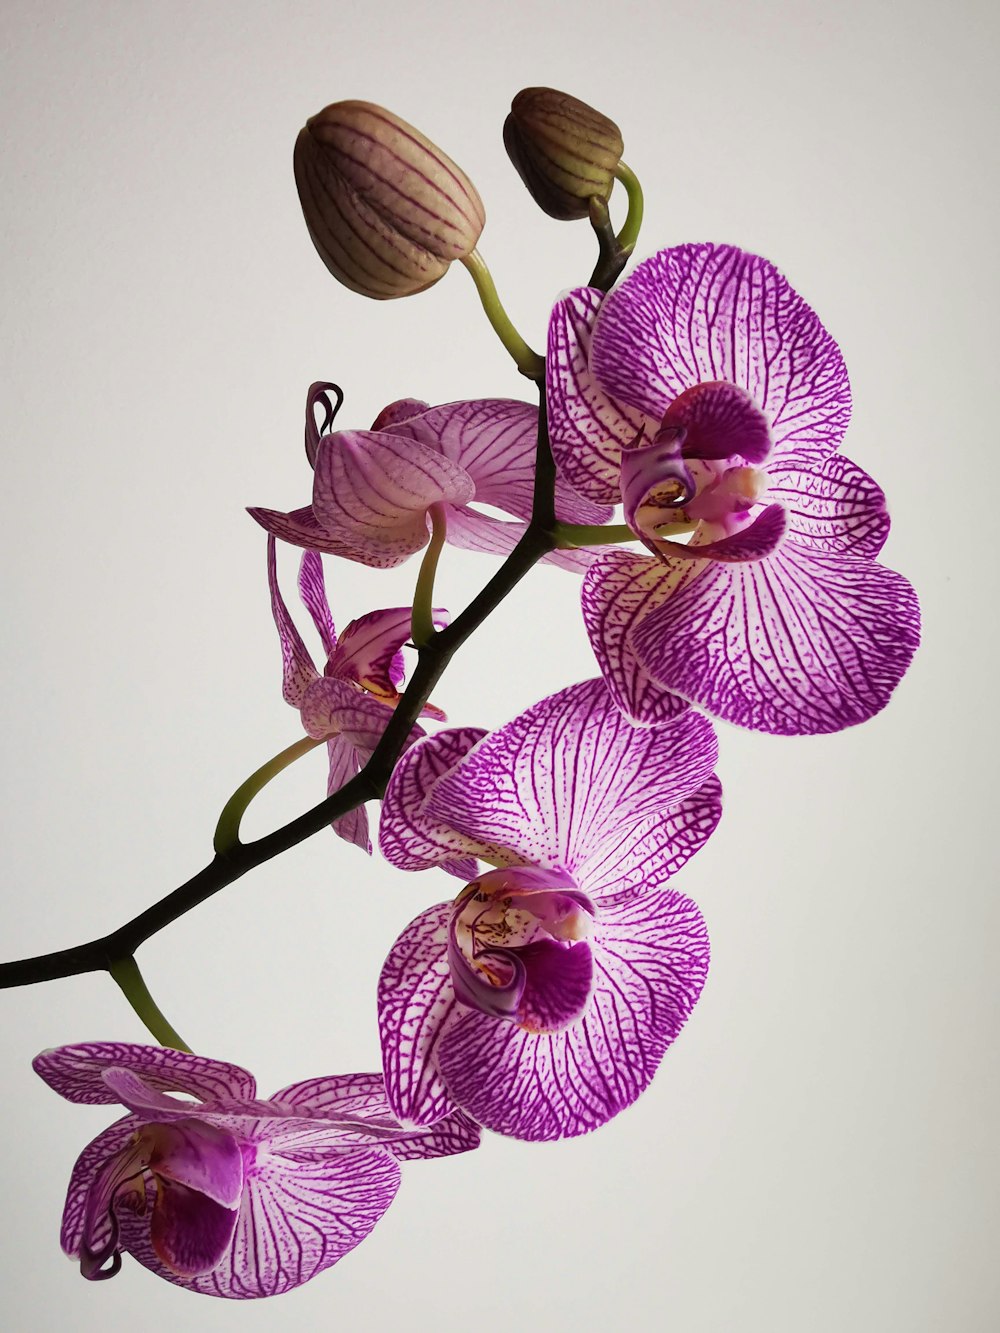 500+ Orchid Pictures | Download Free Images & Stock Photos on Unsplash